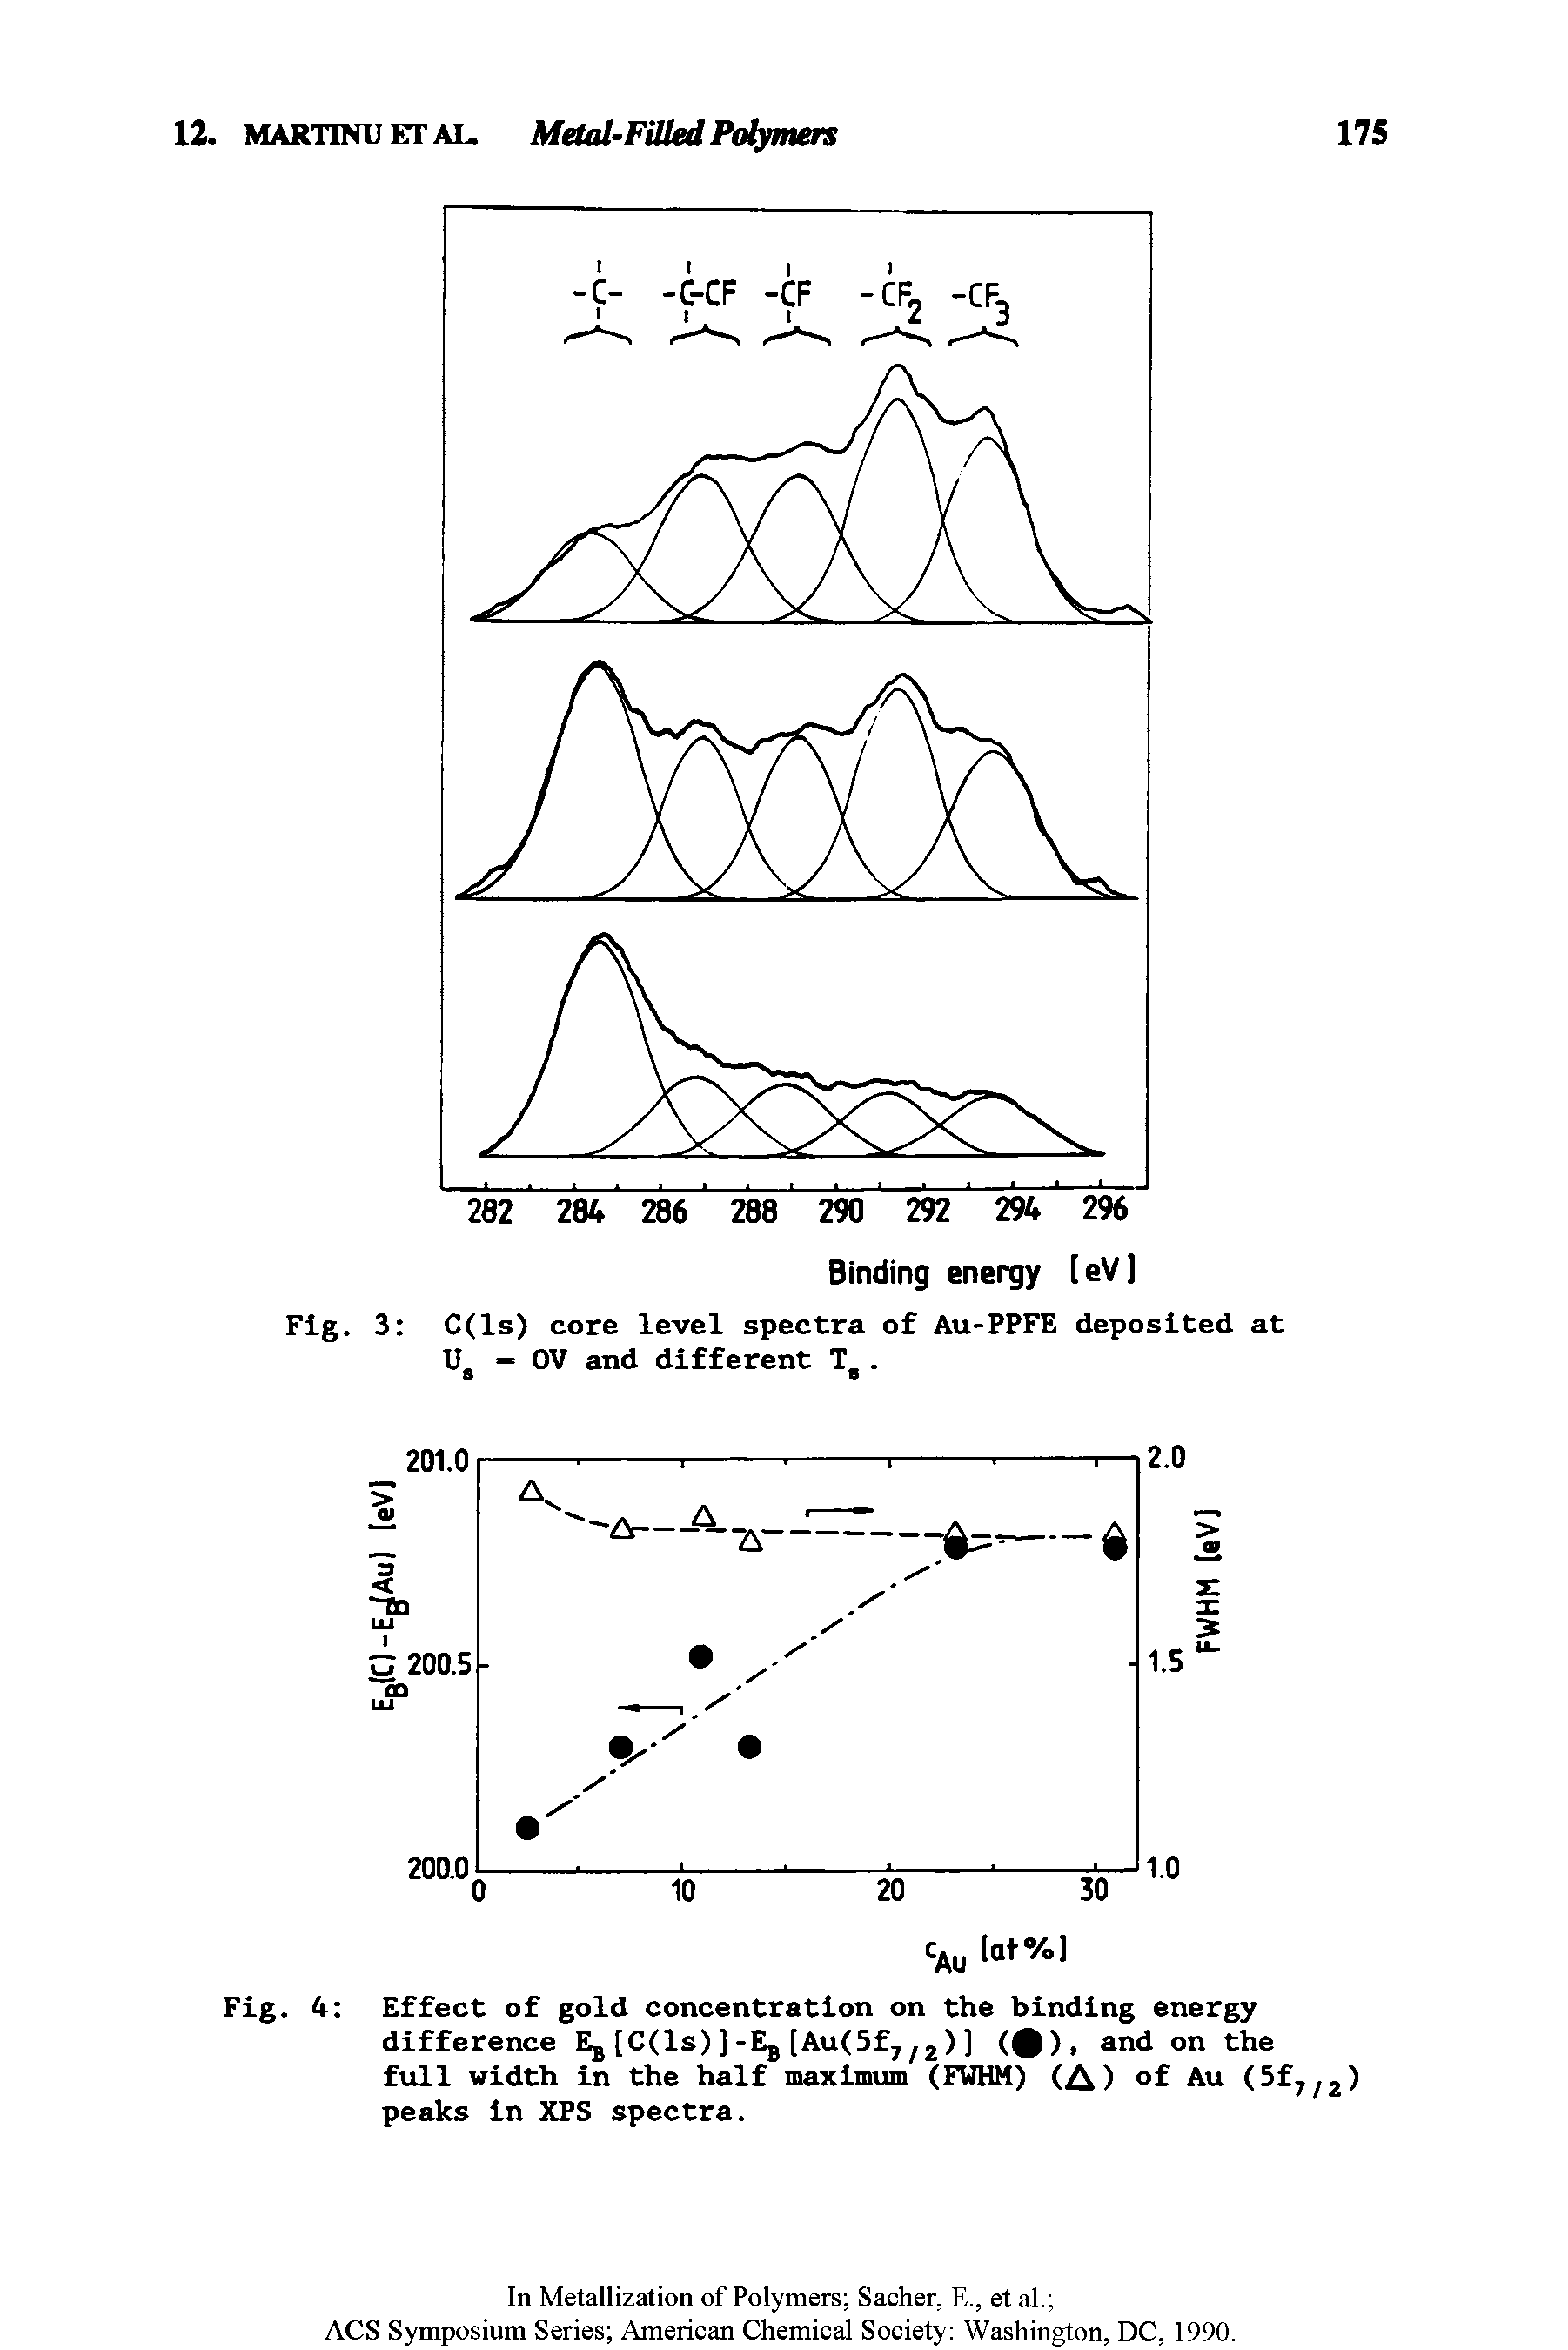 Fig. 4 Effect of gold concentration on the binding energy difference Ej[C(ls)]-EB[Au(5f7/2)] (0), and on the full width in the half maximum (FWHM) (A) of Au (5f7/2) peaks in XPS spectra.